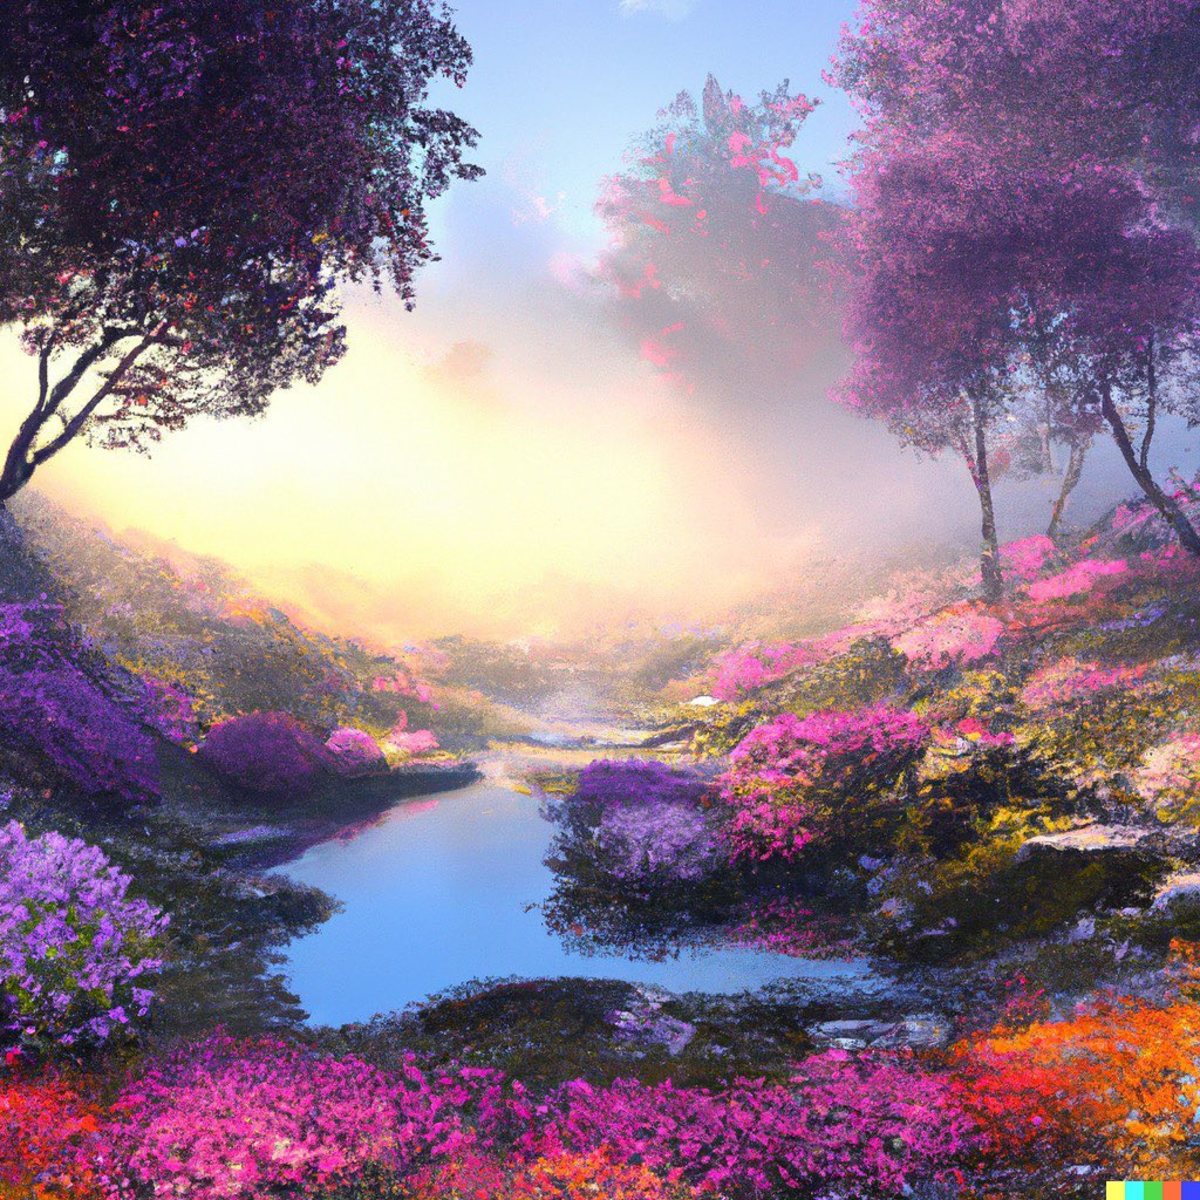 A lake surrounded by vibrant flowers, clothed in fog, digital art  (Actual text prompt used)